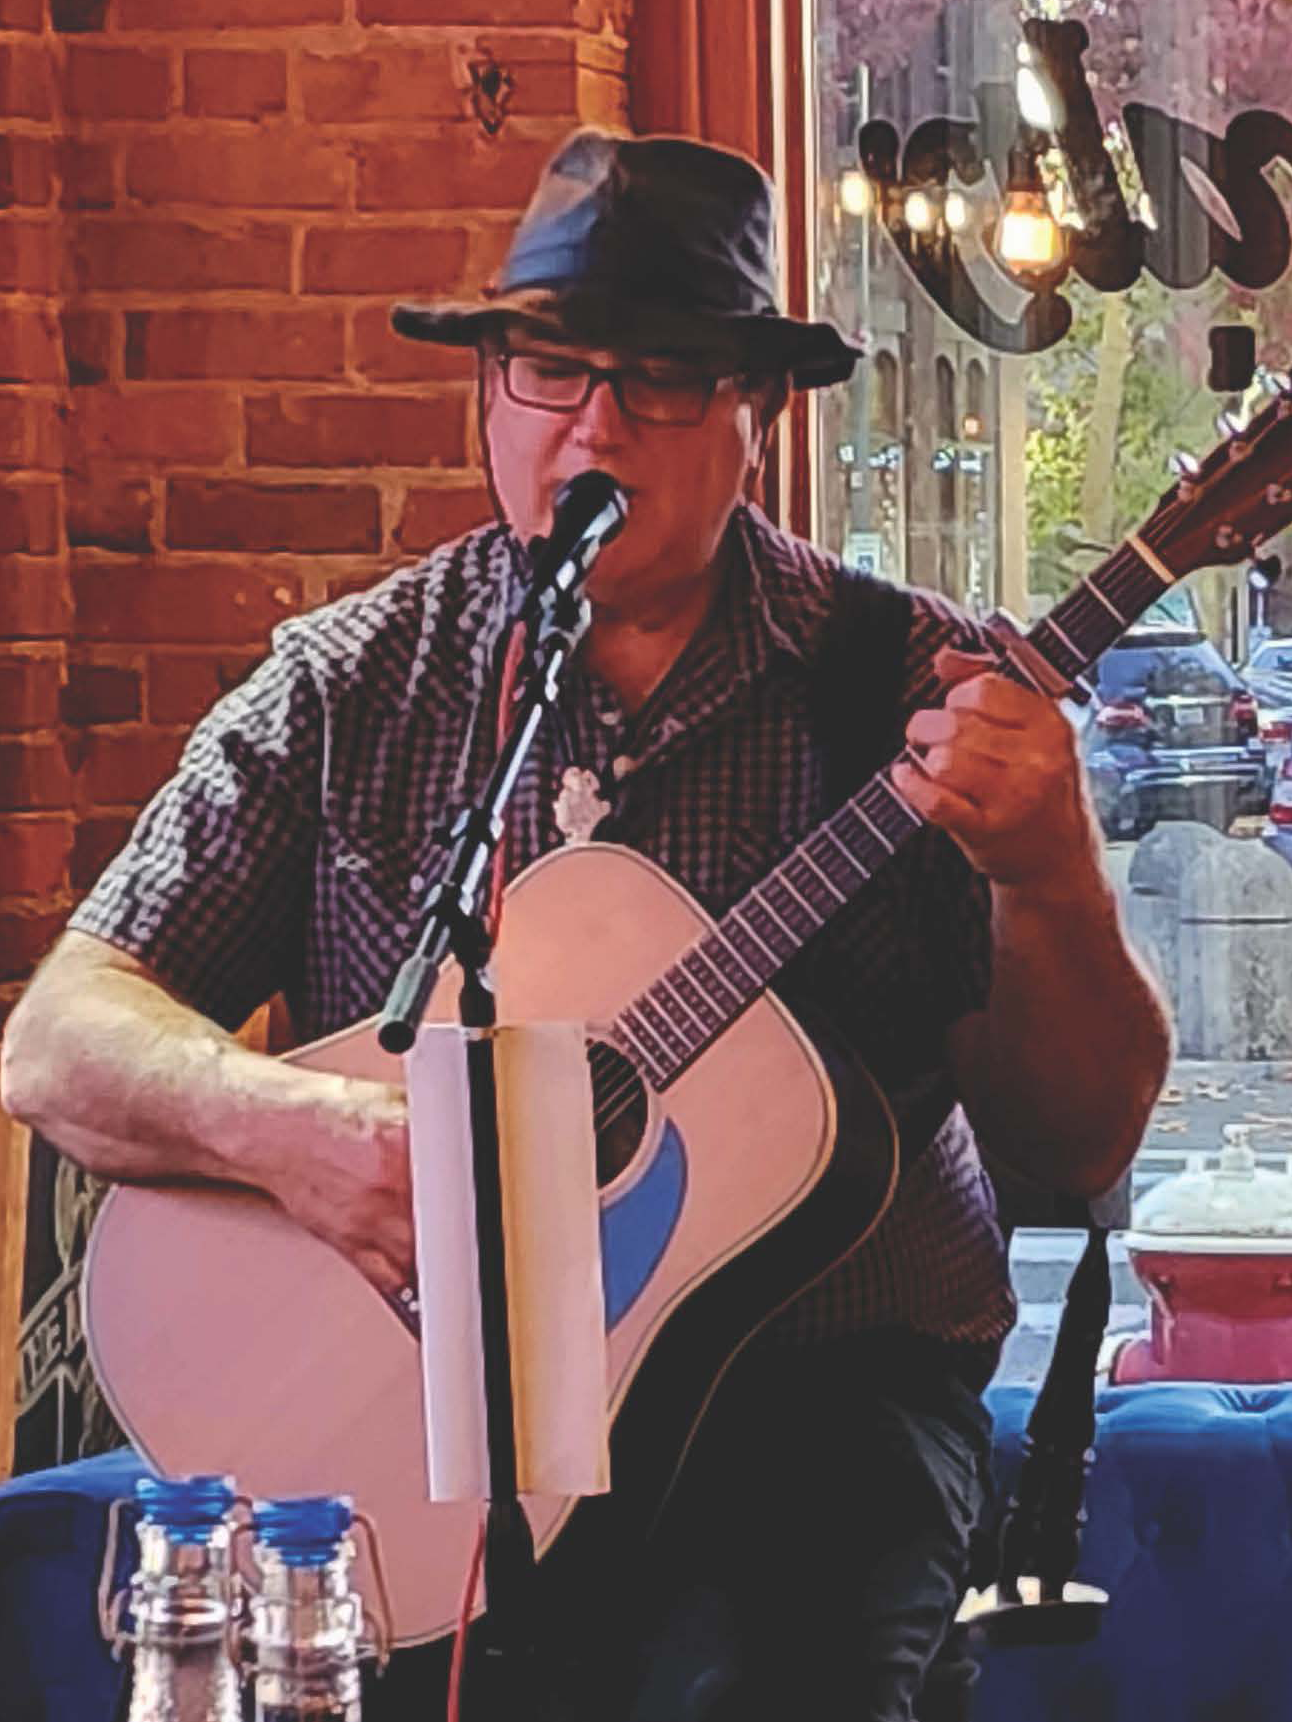 A 50-ish white man in spectacles, a plaid shirt, and a wide-brimmed hat sings into a microphone while playing an acoustic guitar.